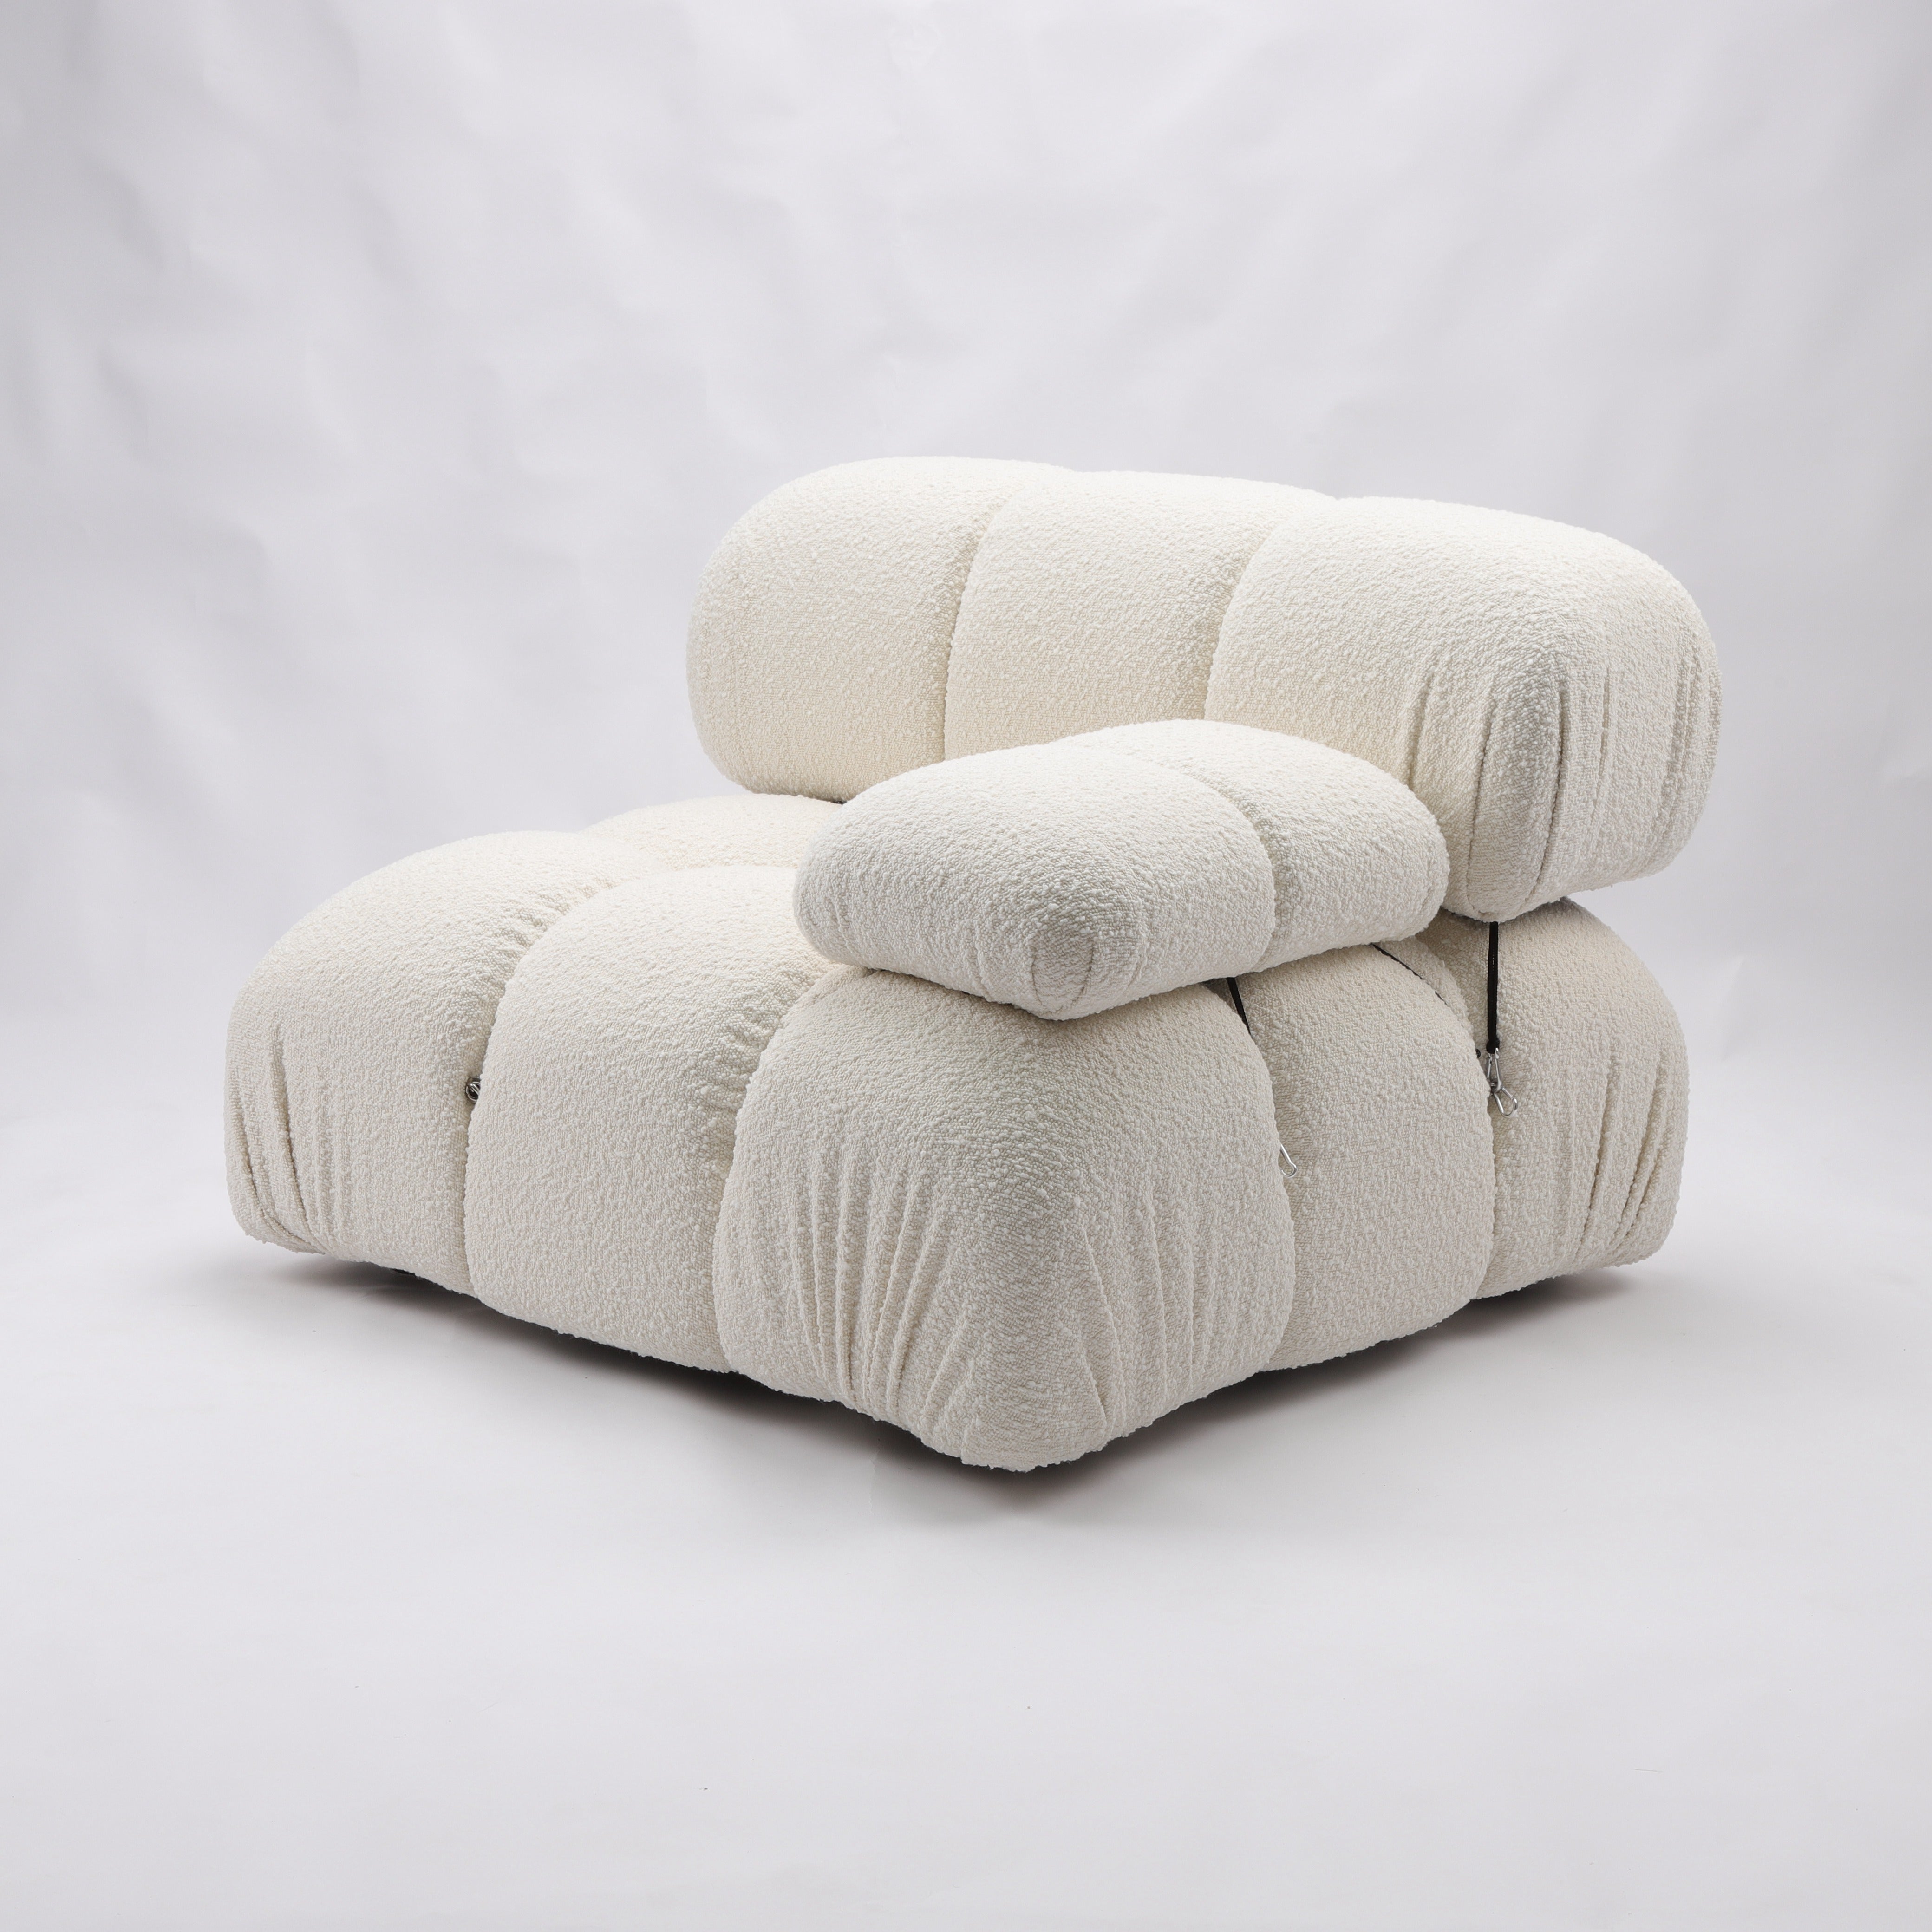 ZNTS Gioia 1-Seater Chair - Left Armrest - Cream/White Boucle DIS-A-0077-1SEAT-LEFTARM-BOUCLE2016-2